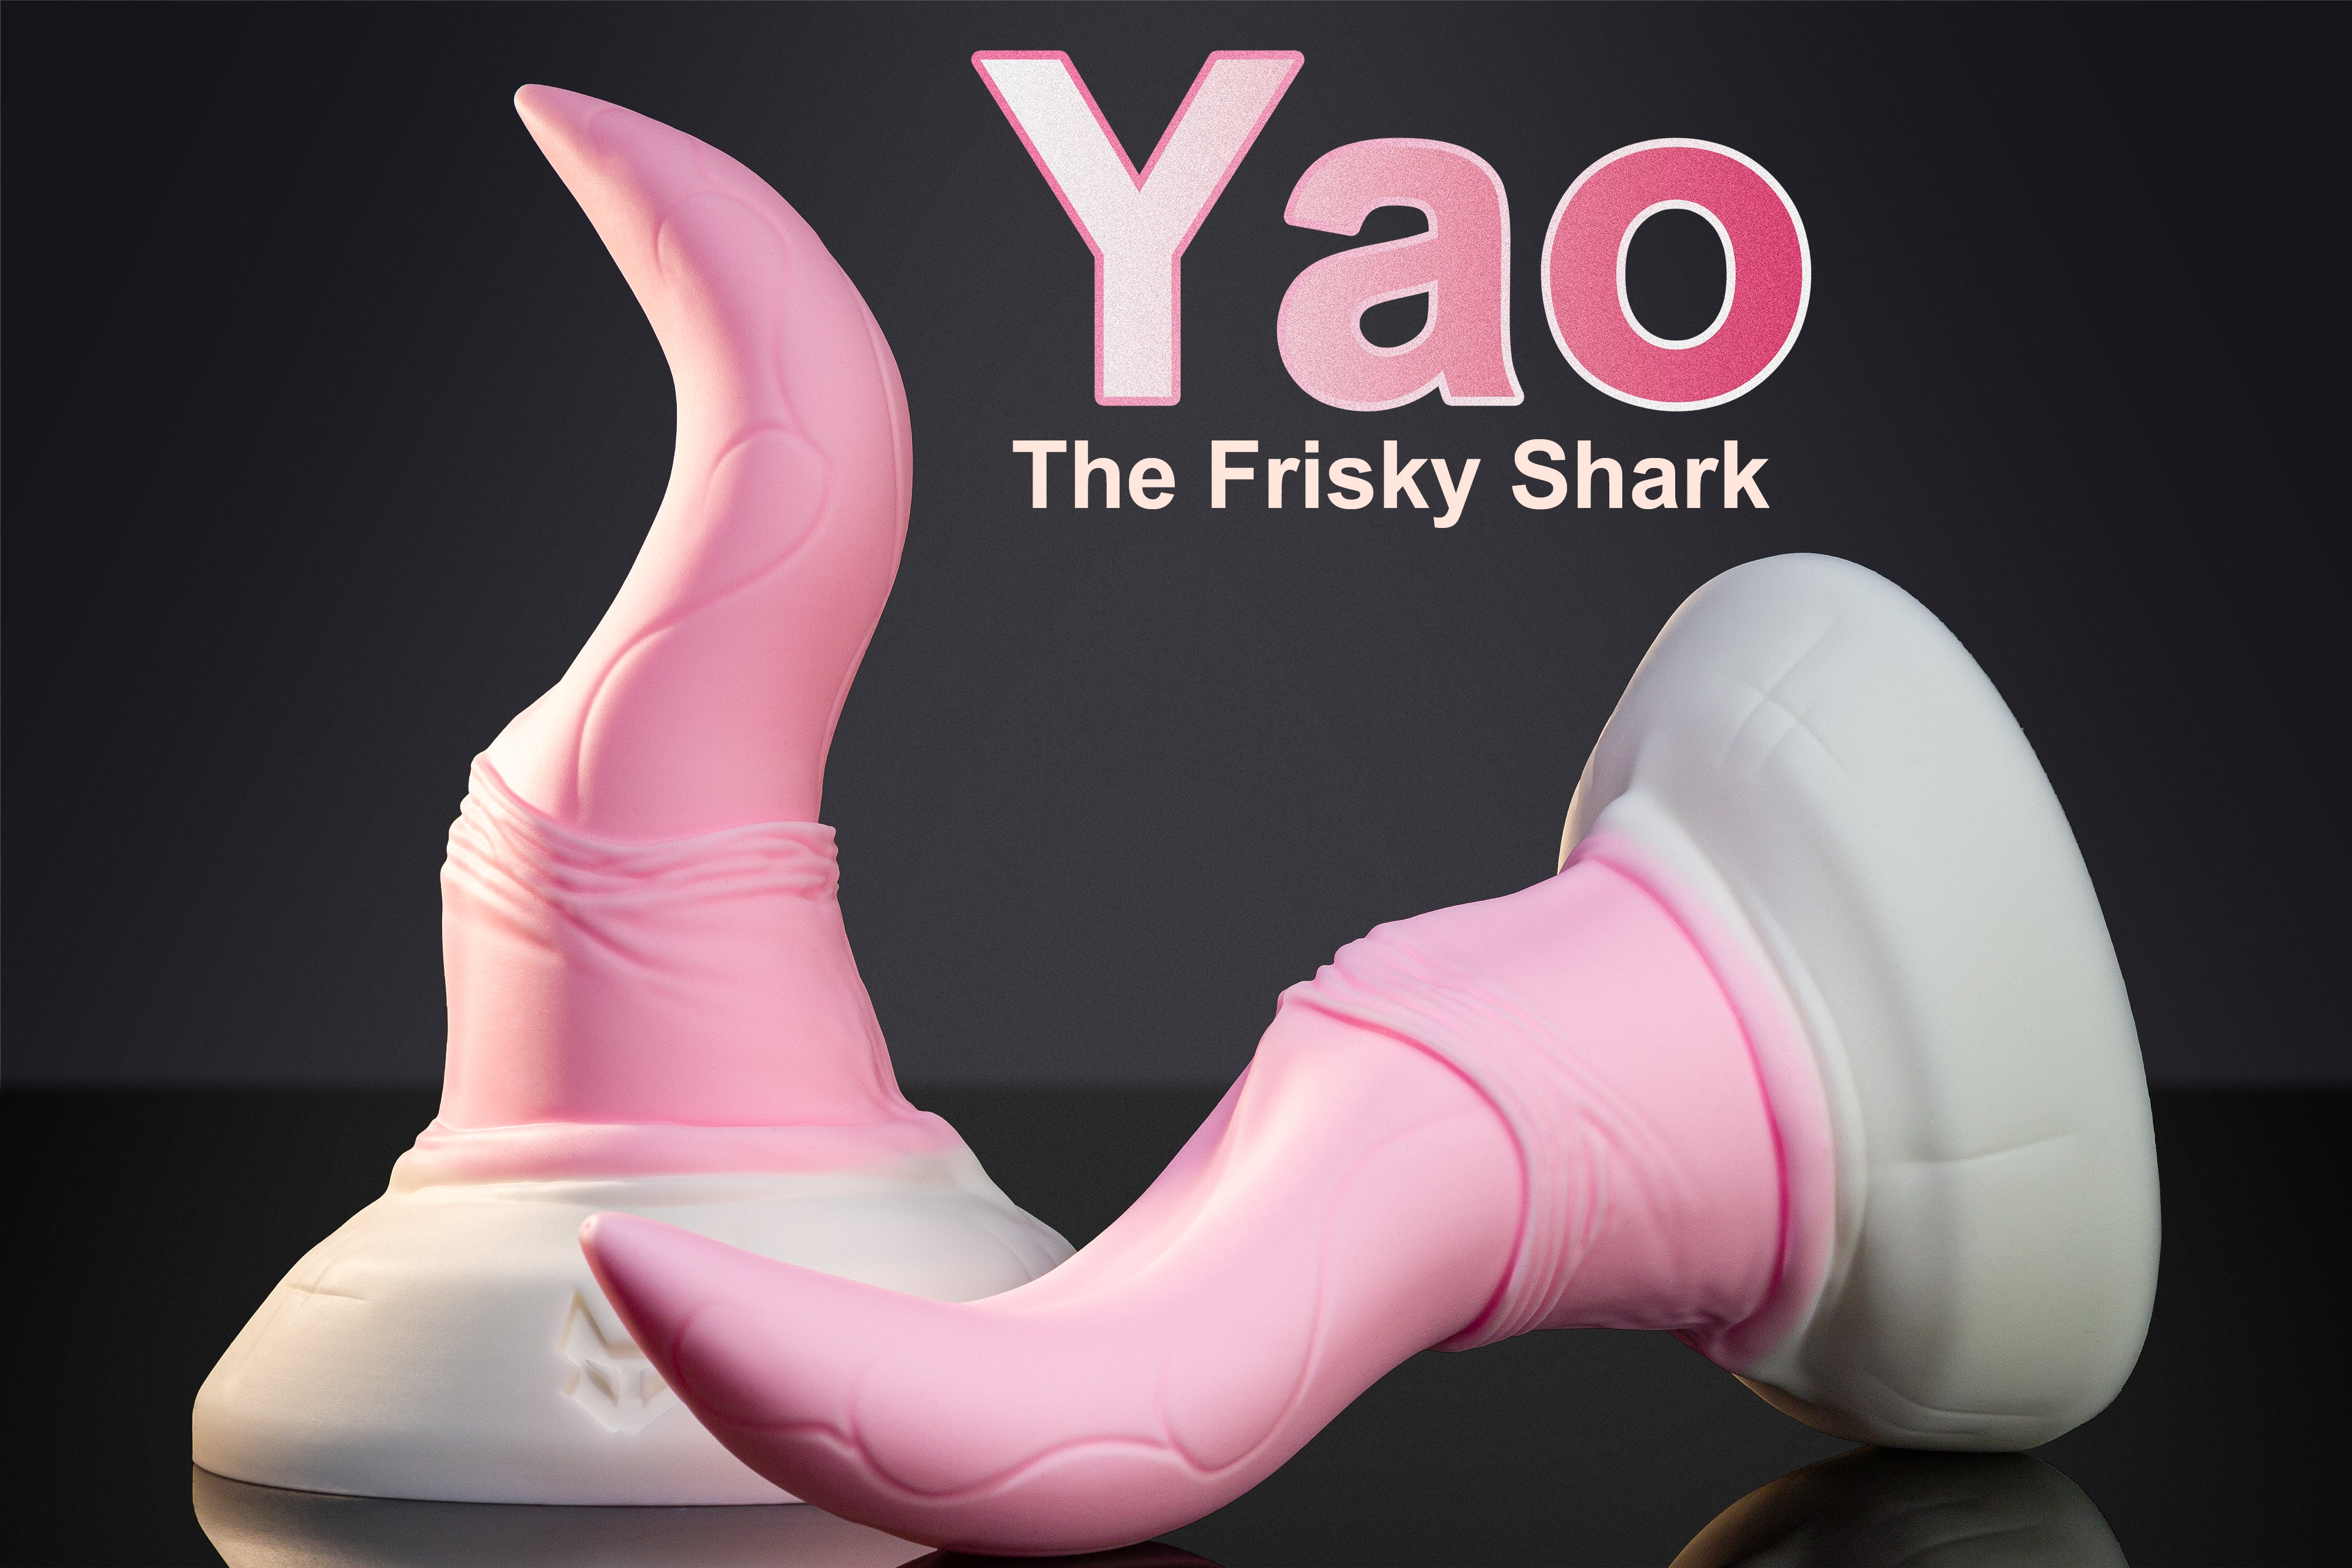 yao the shark product image with product name